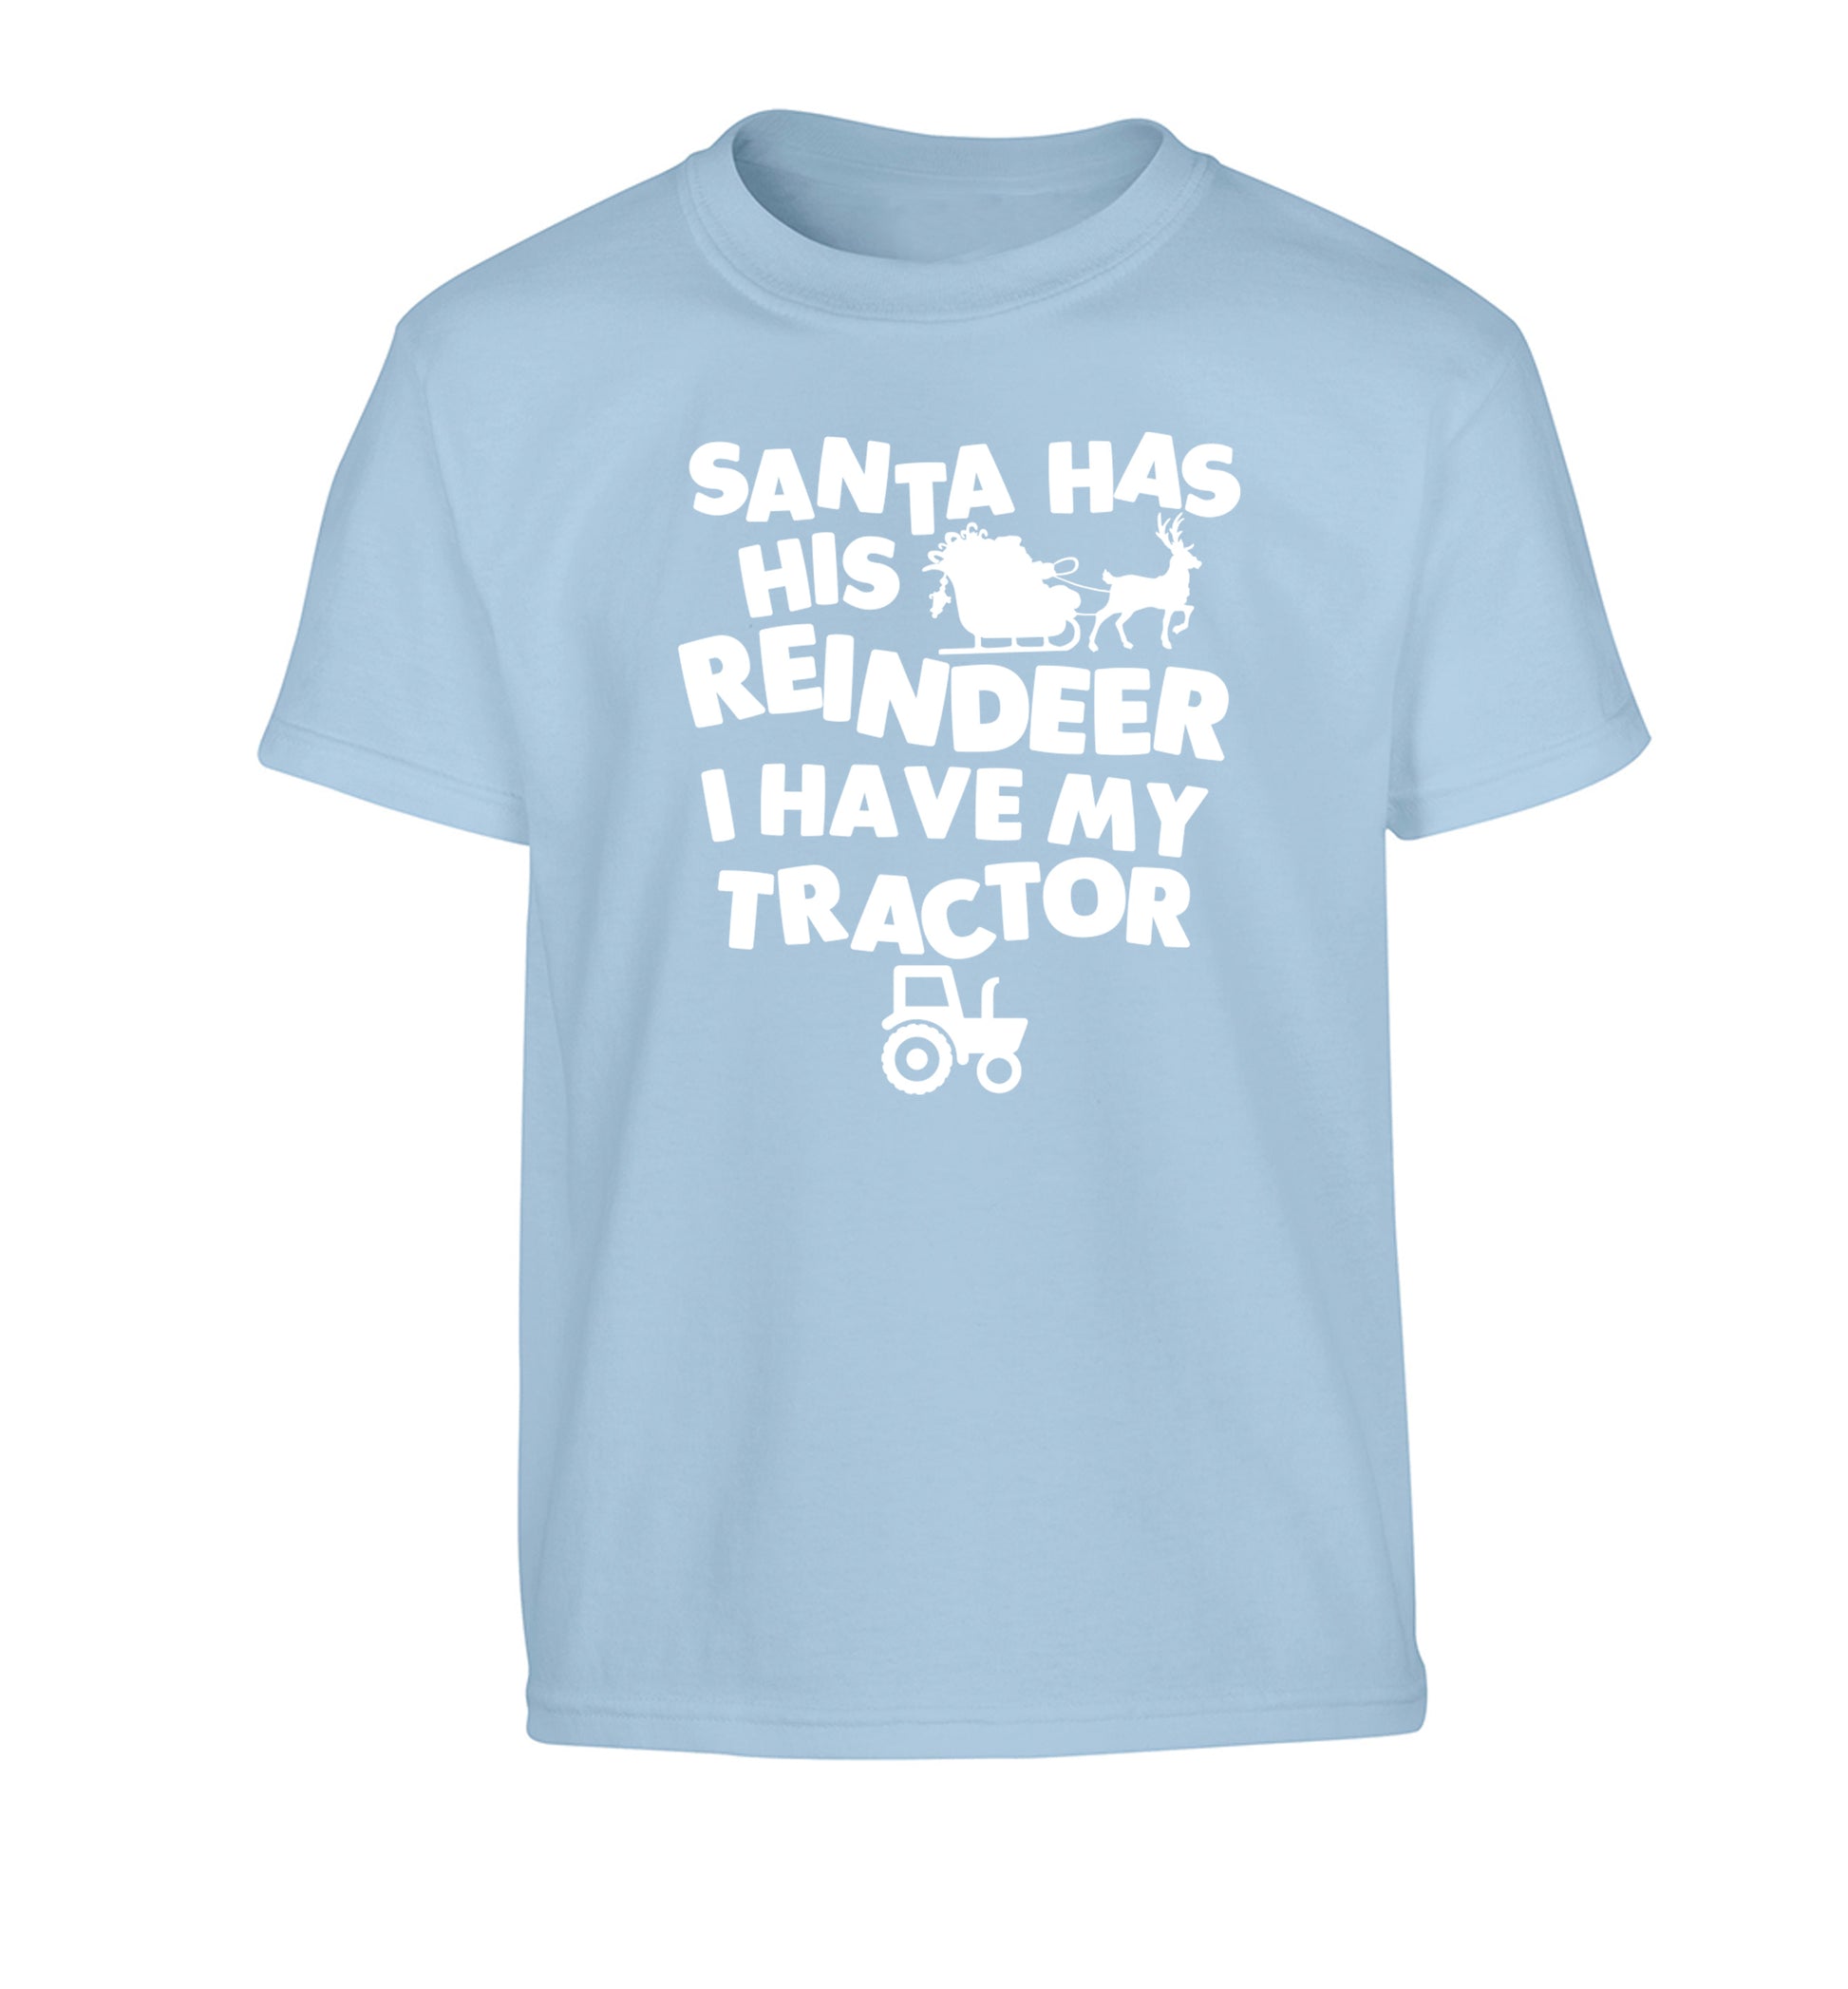 Santa has his reindeer I have my tractor Children's light blue Tshirt 12-14 Years